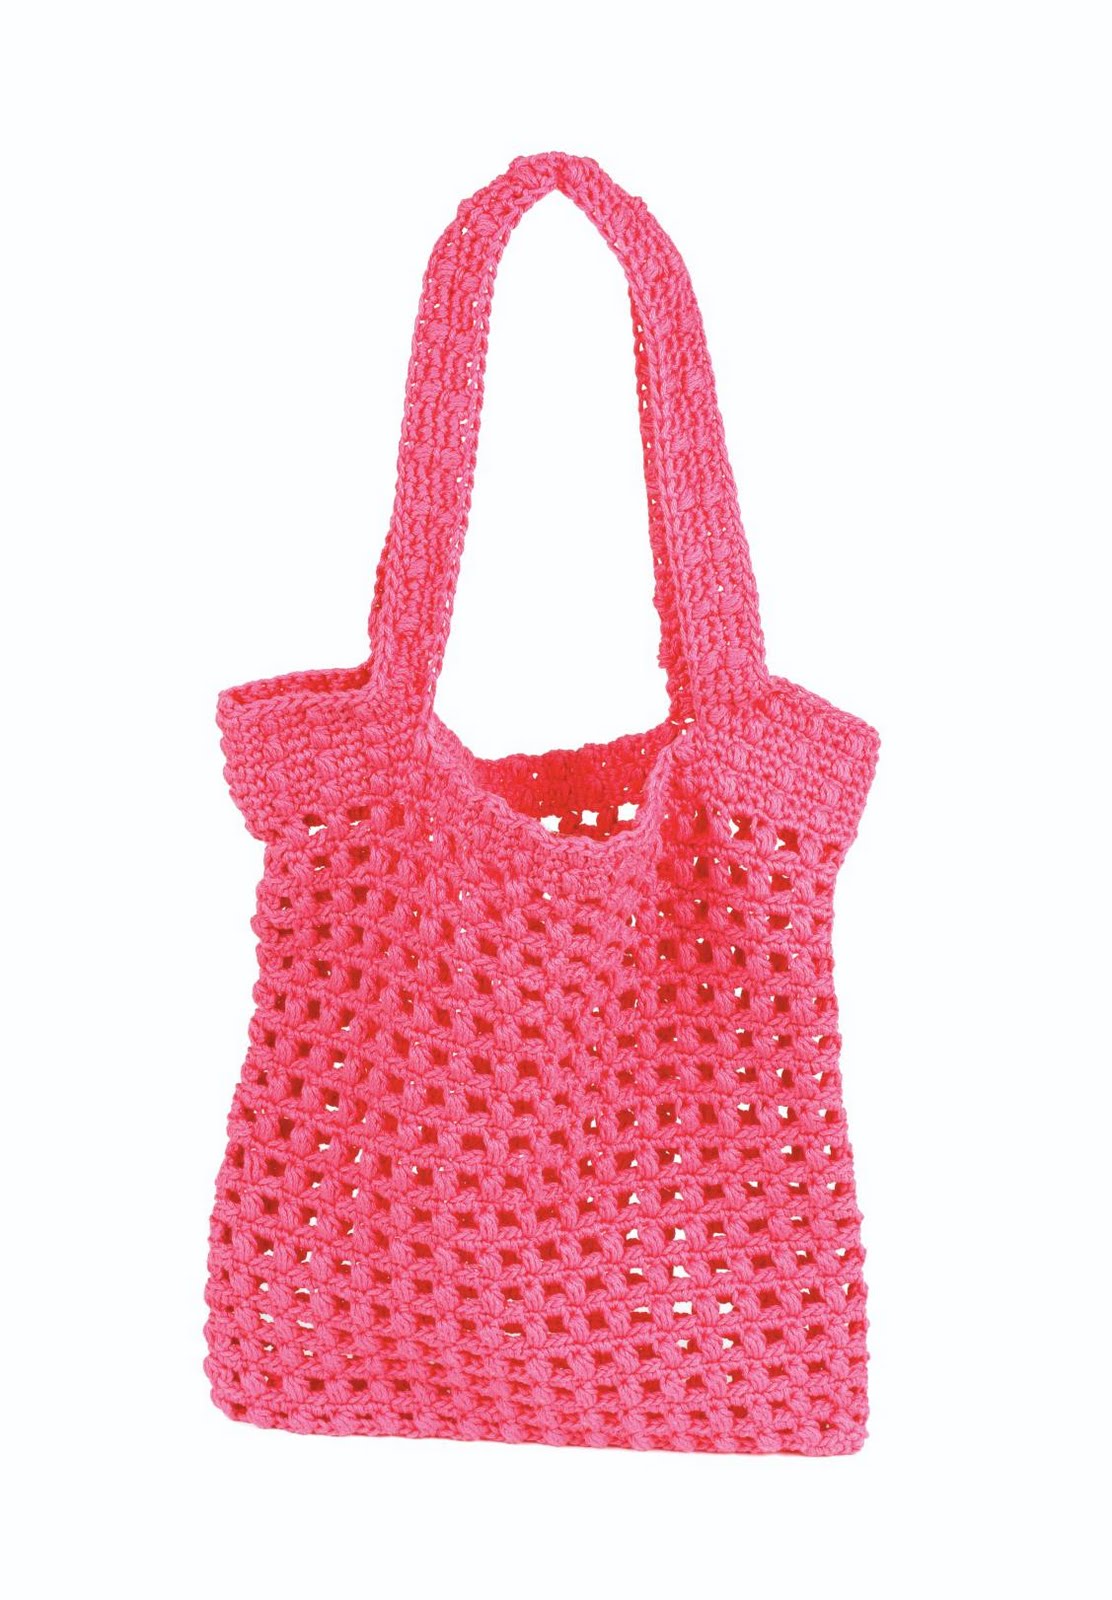 notyourgranny'scrochet: Crocheted TOTES FOR ALL REASONS